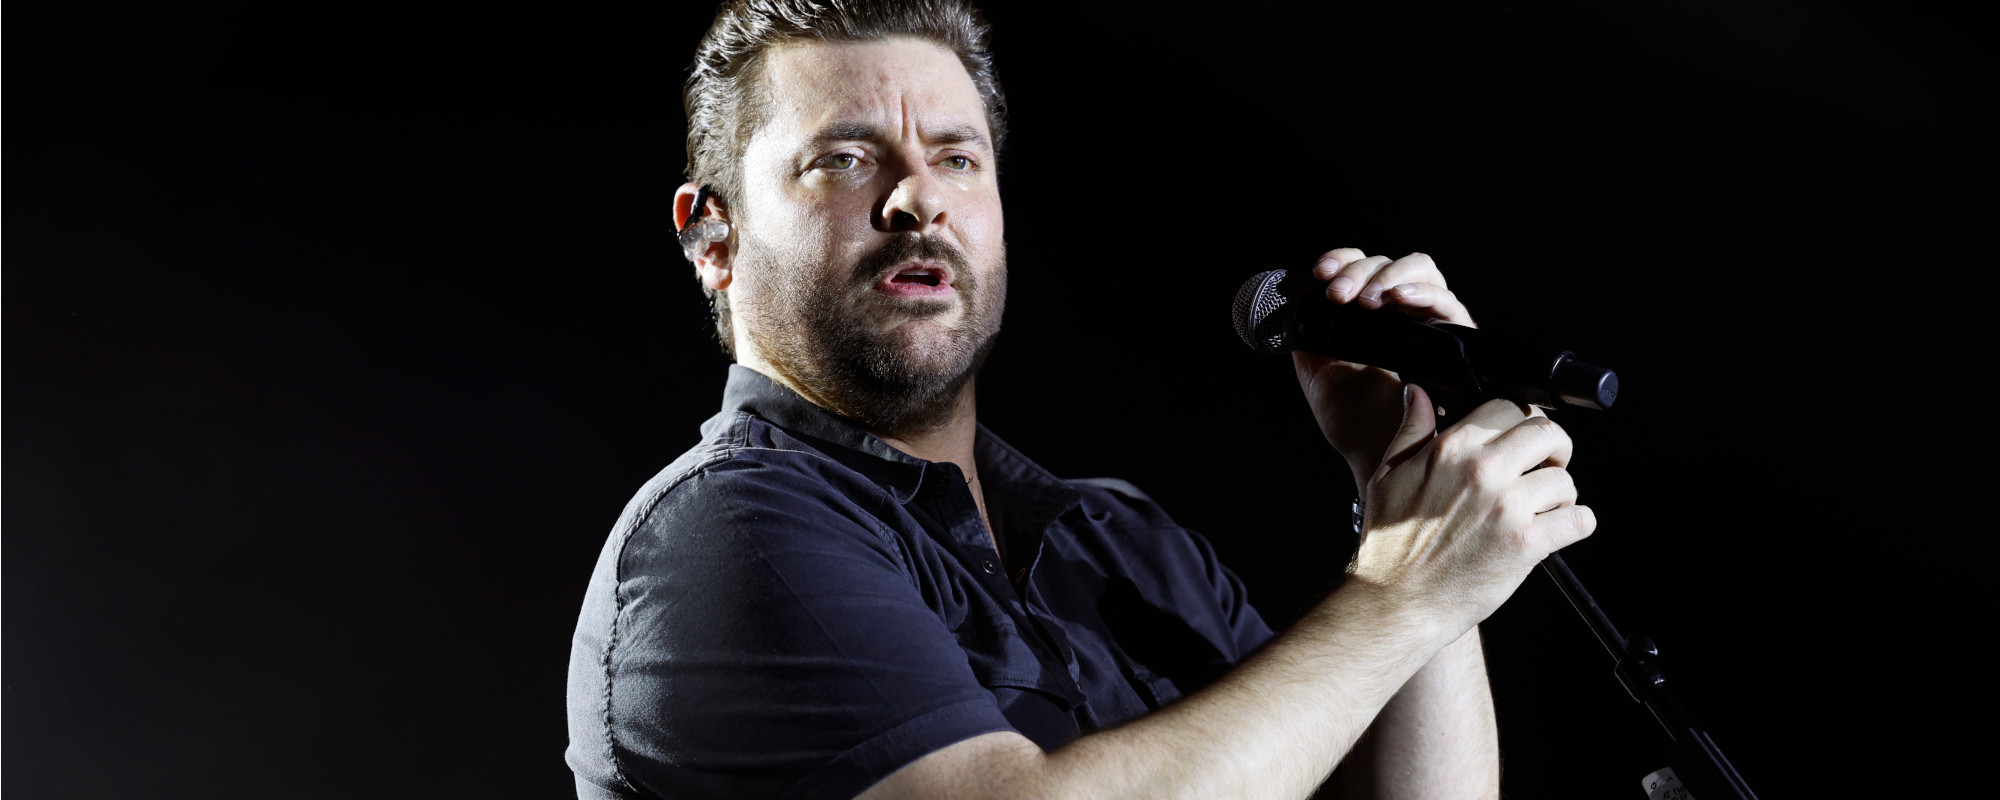 Chris Young Reveals Bruised Covered Photo From Aftermath of Police Run-in